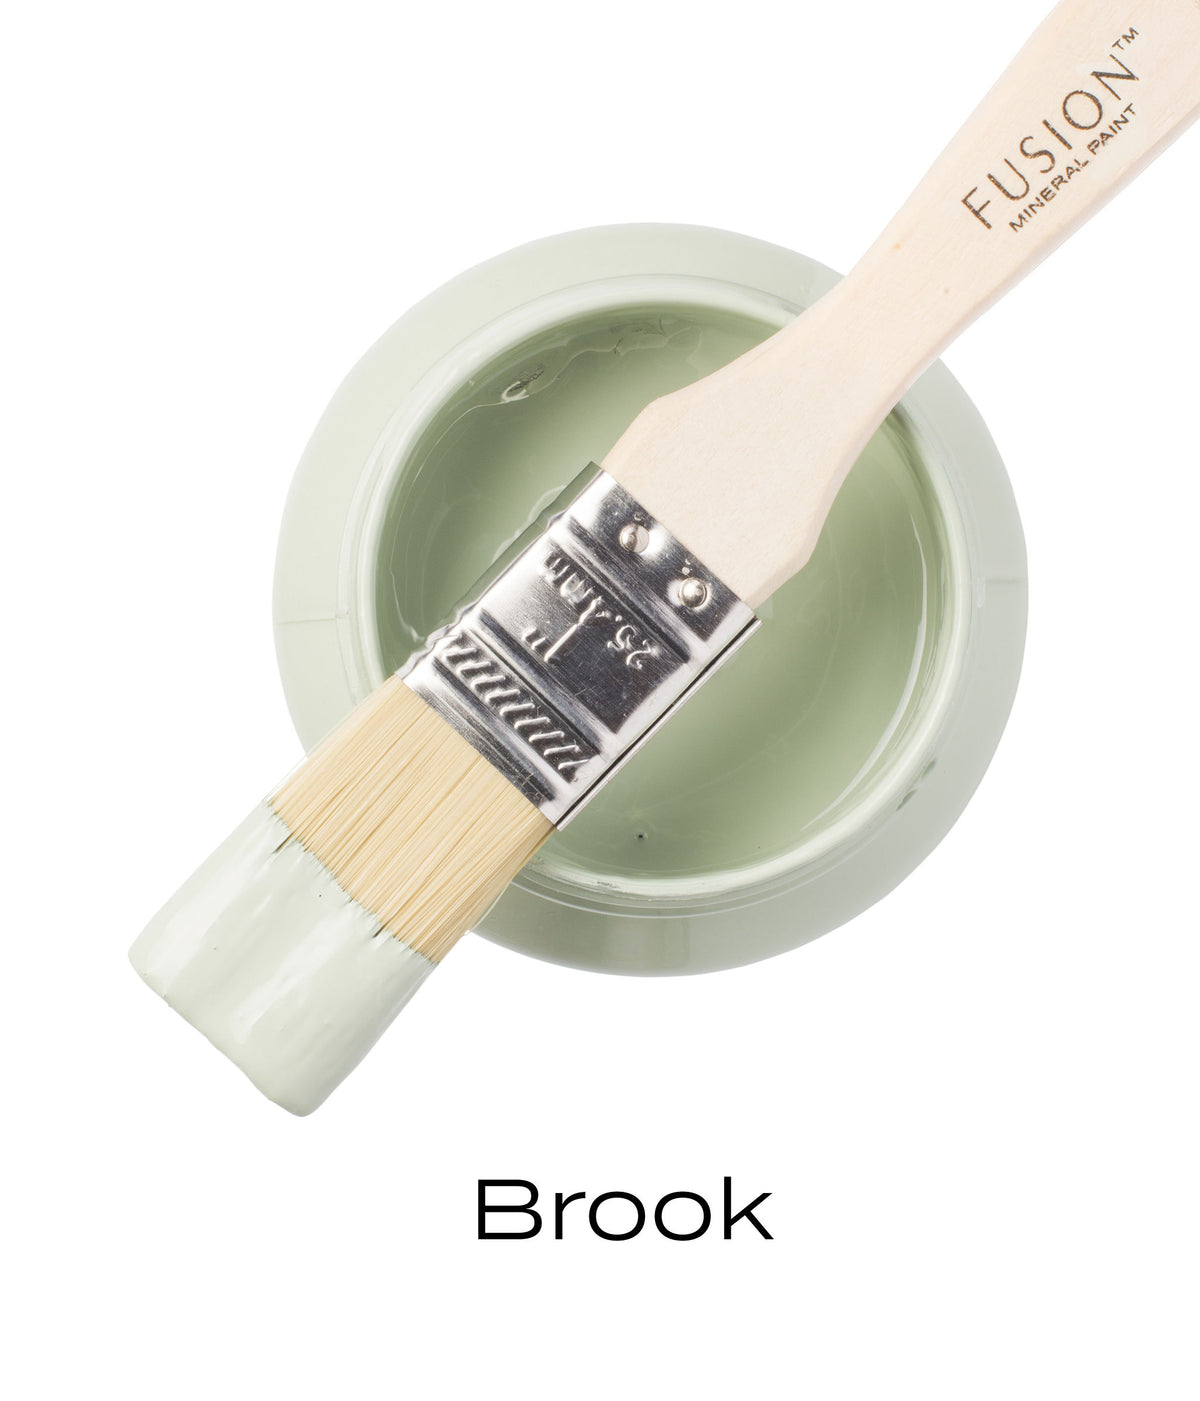 Brook-Fusion Mineral Paint